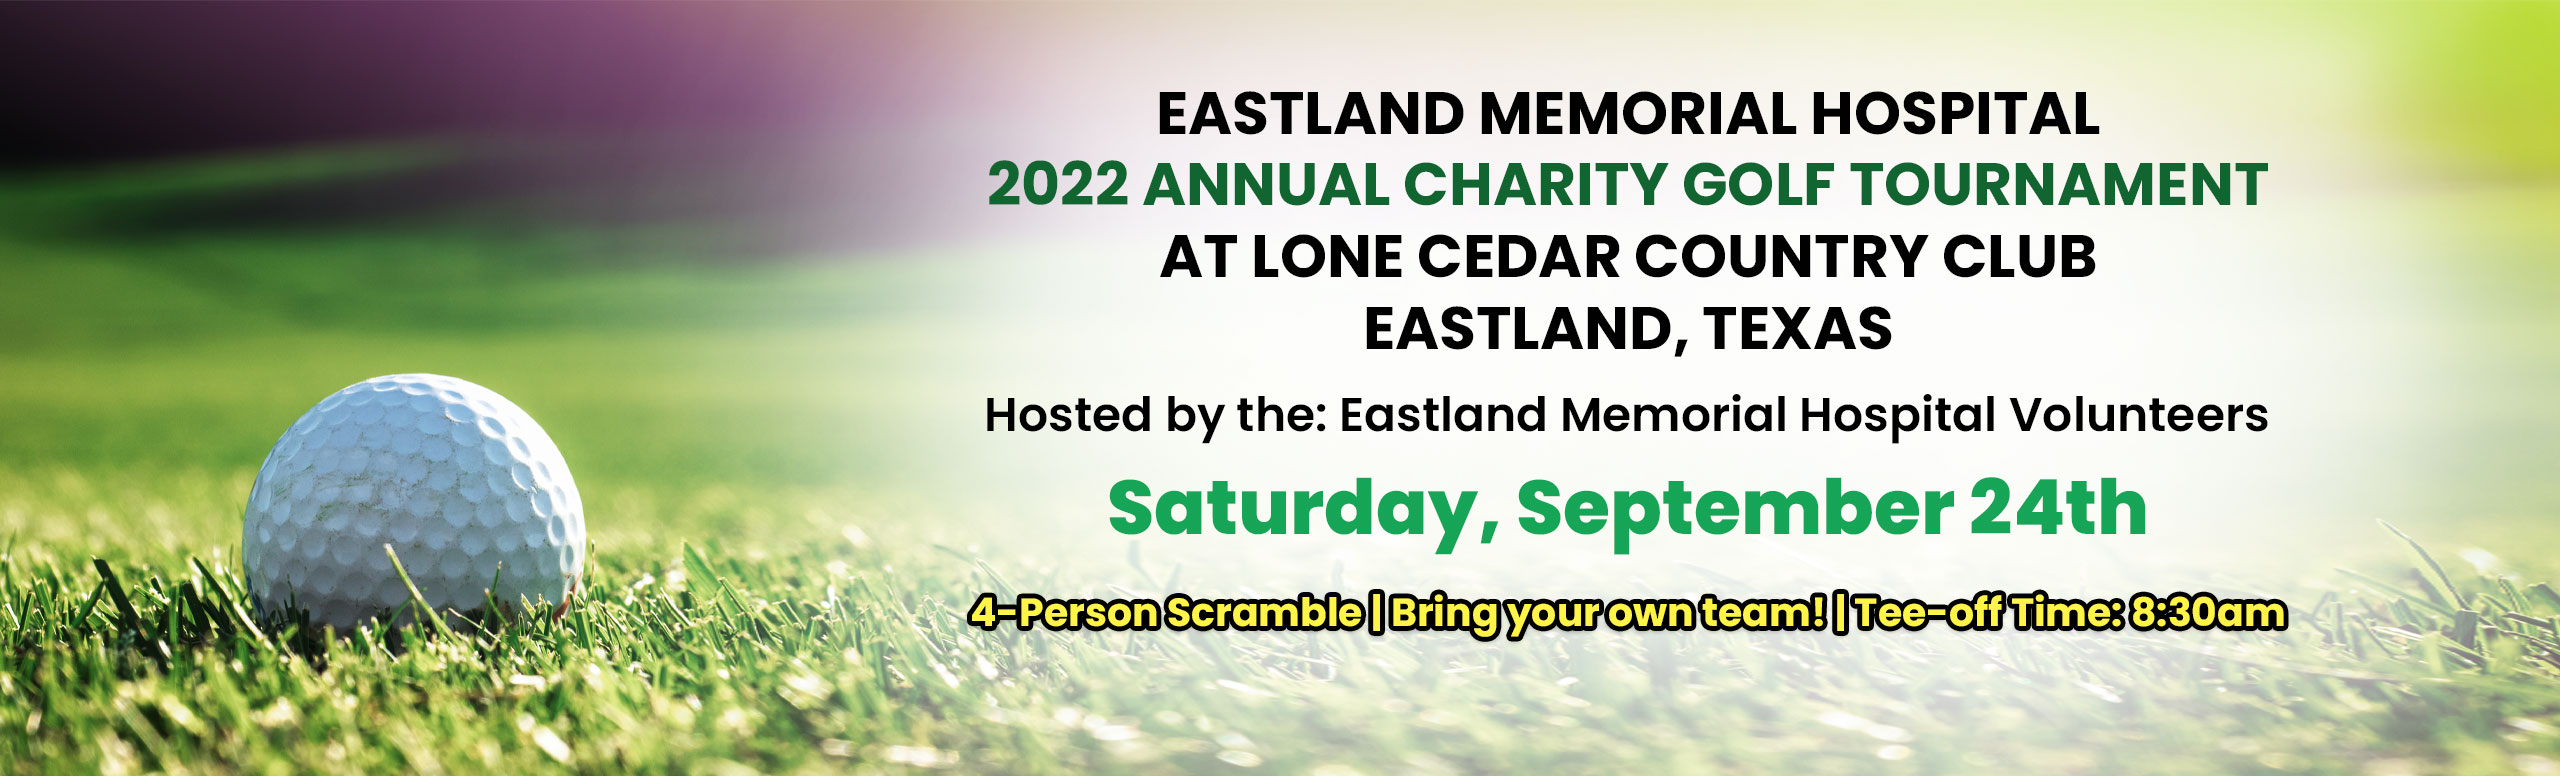 Banner picture of a golf ball on a golf course. Banner says:

EASTLAND MEMORIAL HOSPITAL 
2022 ANNUAL CHARITY GOLF TOURNAMENT AT LONE CEDAR COUNTRY CLUB
EASTLAND, TEXAS

Hosted by the: Eastland Memorial Hospital Volunteers
Saturday, September 24th
4-PersonScrable|Bringyourownteam!|Tee-offTime:8:30am